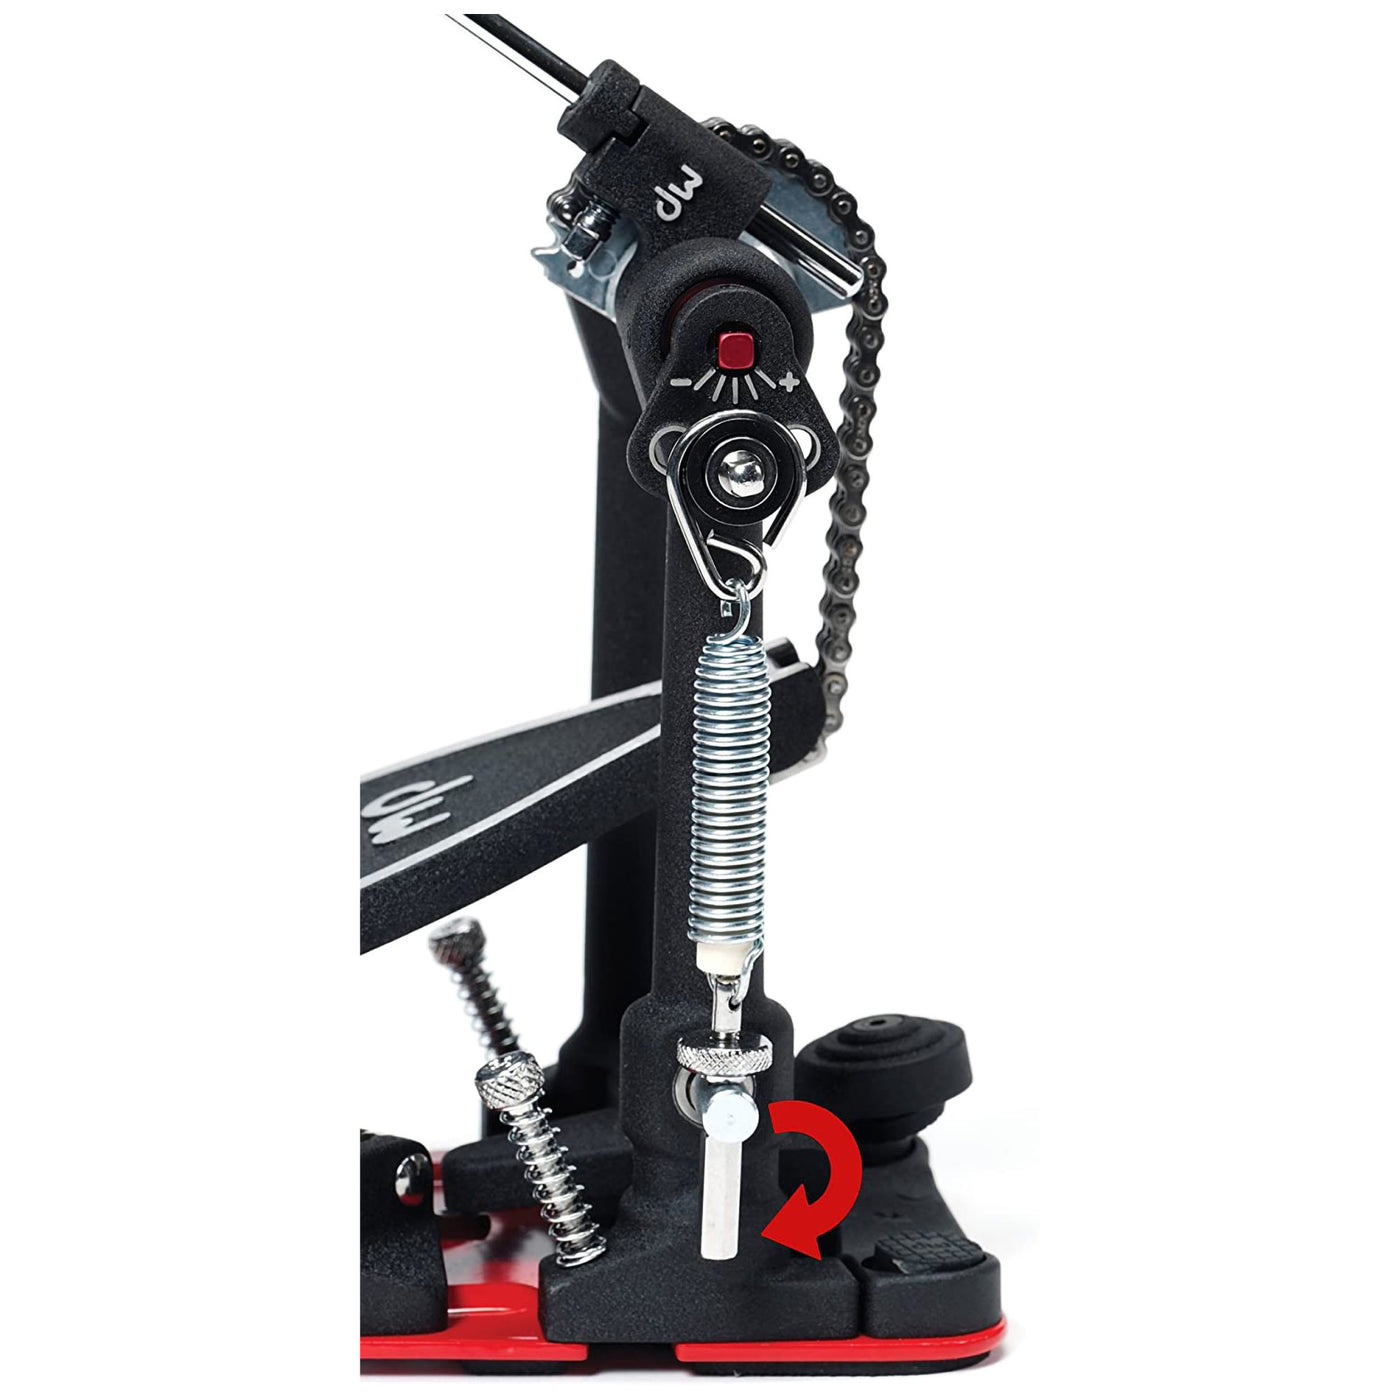 DW 5002 Series Delta III Turbo Double Bass Drum Pedal